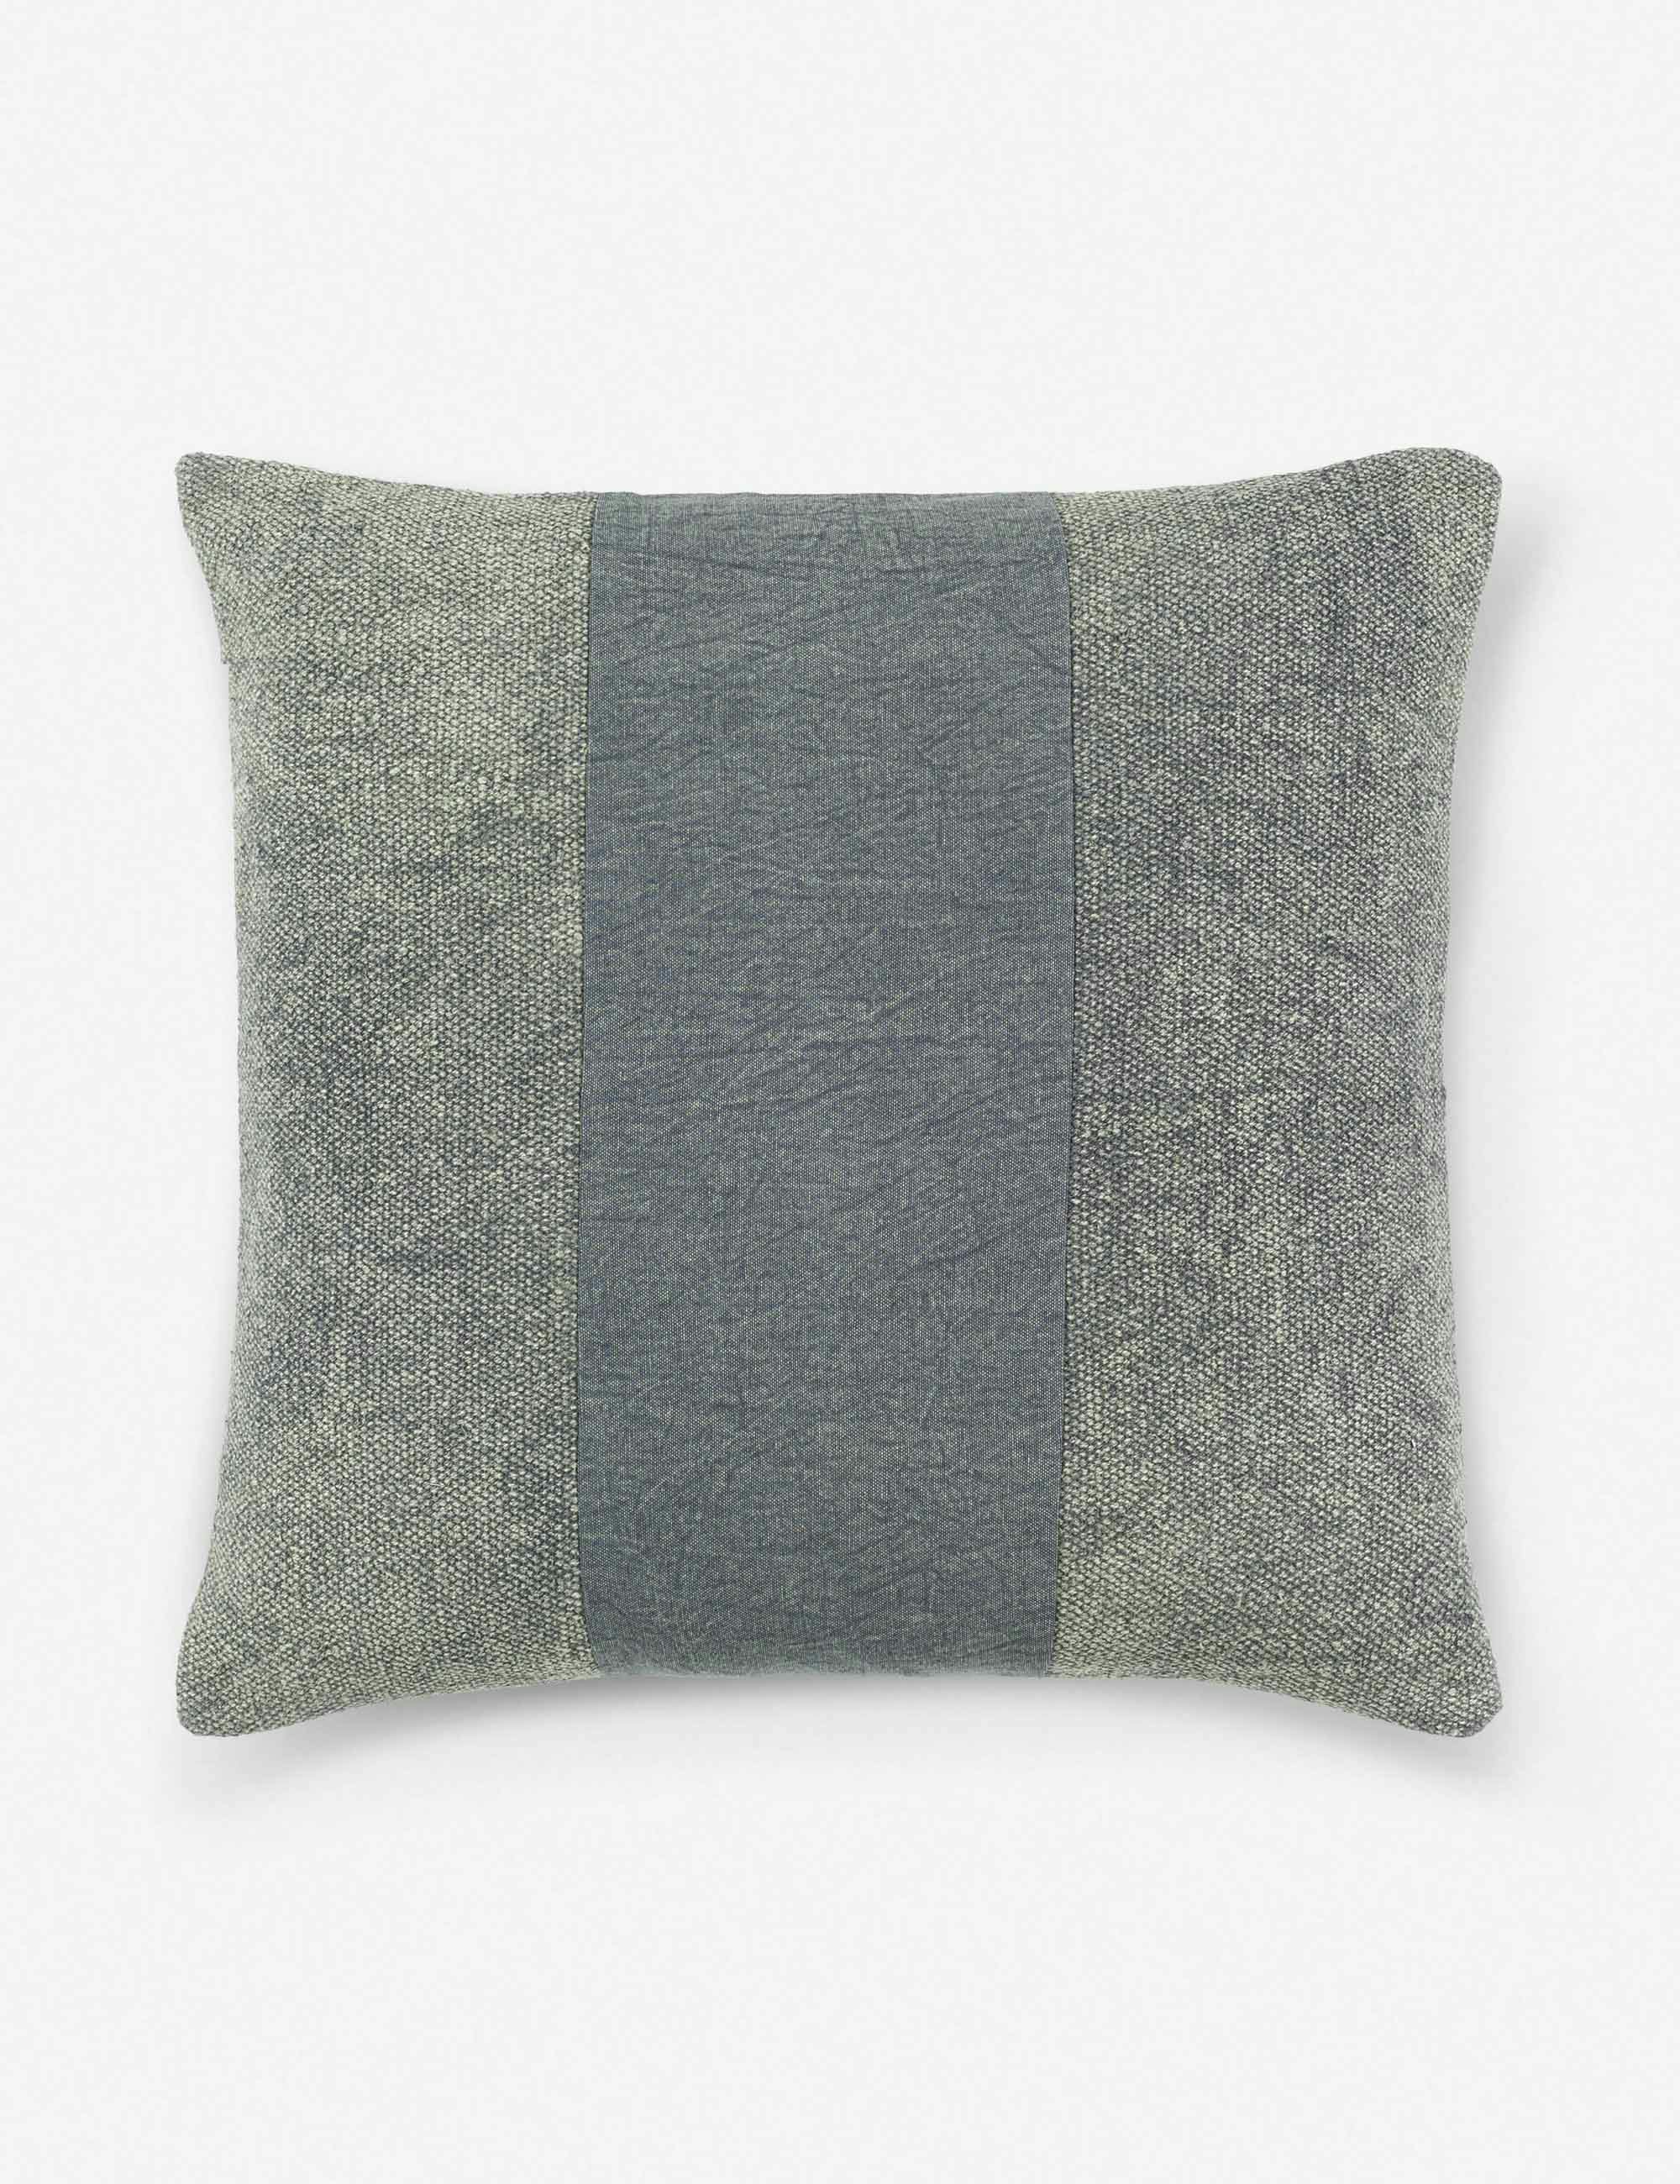 Cottage Charm Square Woven Accent Pillow, 20"H x 20"W - Gray